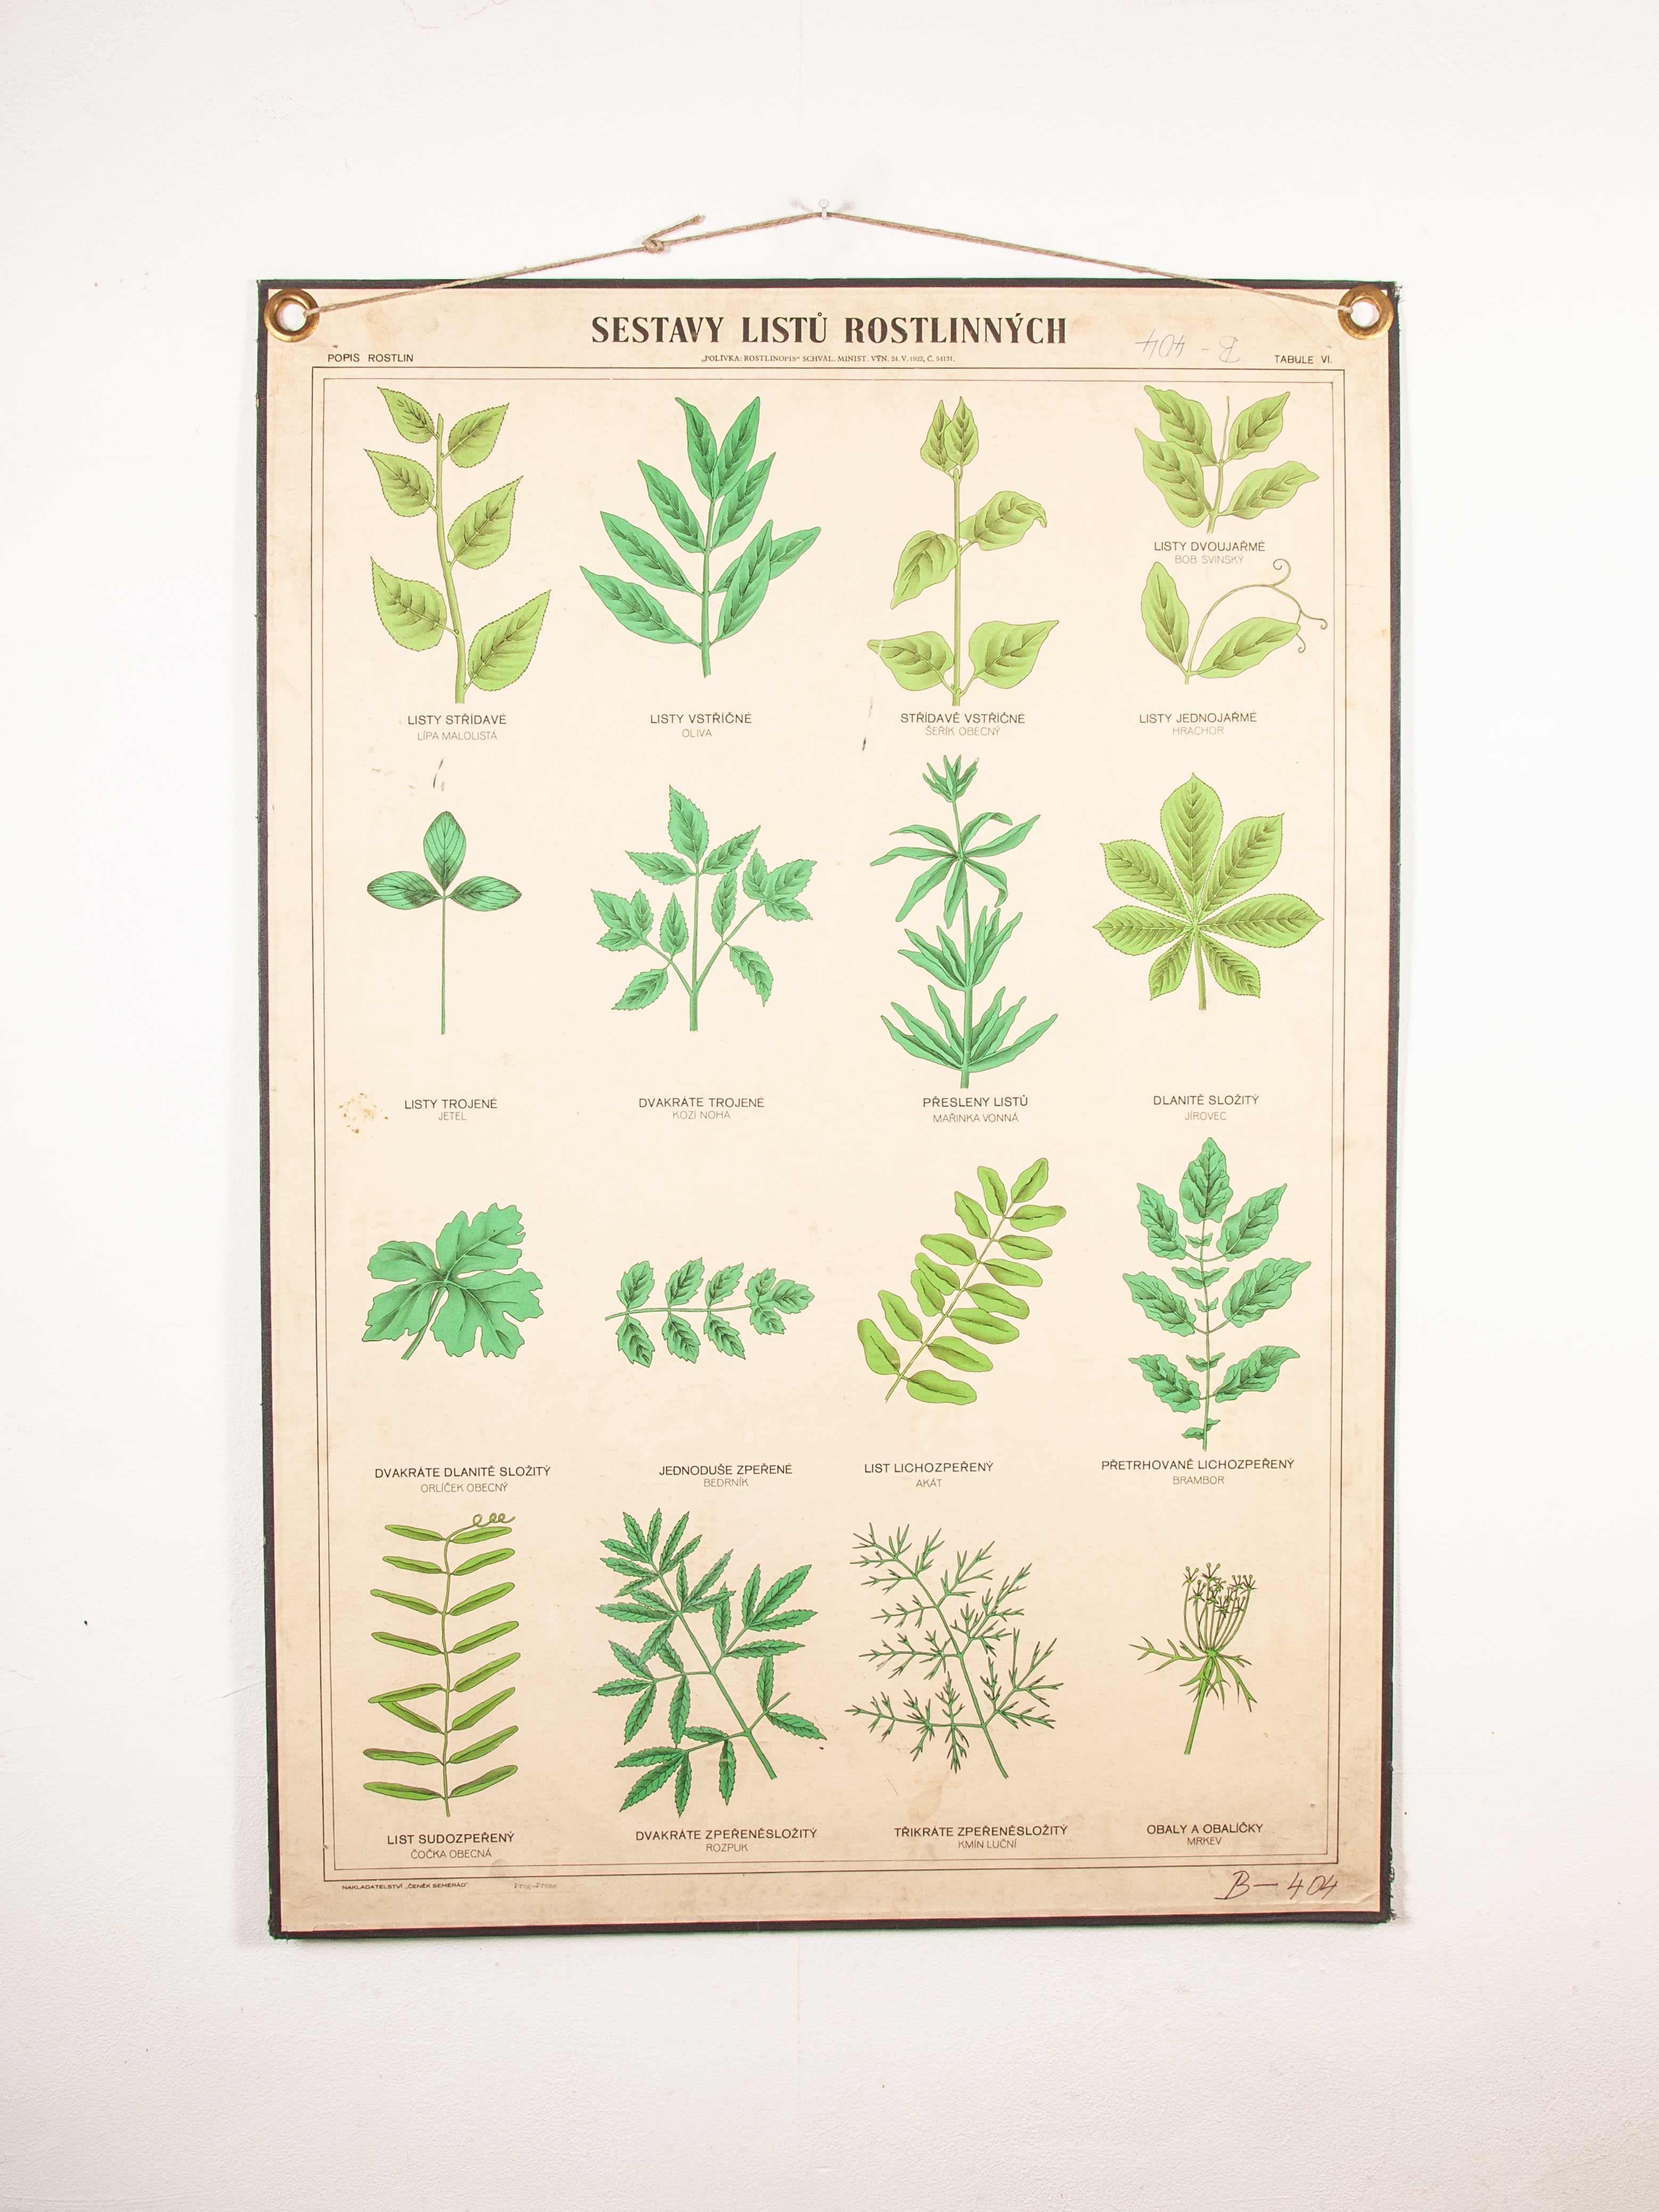 Early 20th century educational chart, rigid chart plants
Early 20th century educational chart, rigid chart plants. A rare educational botanical poster from the Czech Republic. This rigid card backed chart is in excellent condition for its age with